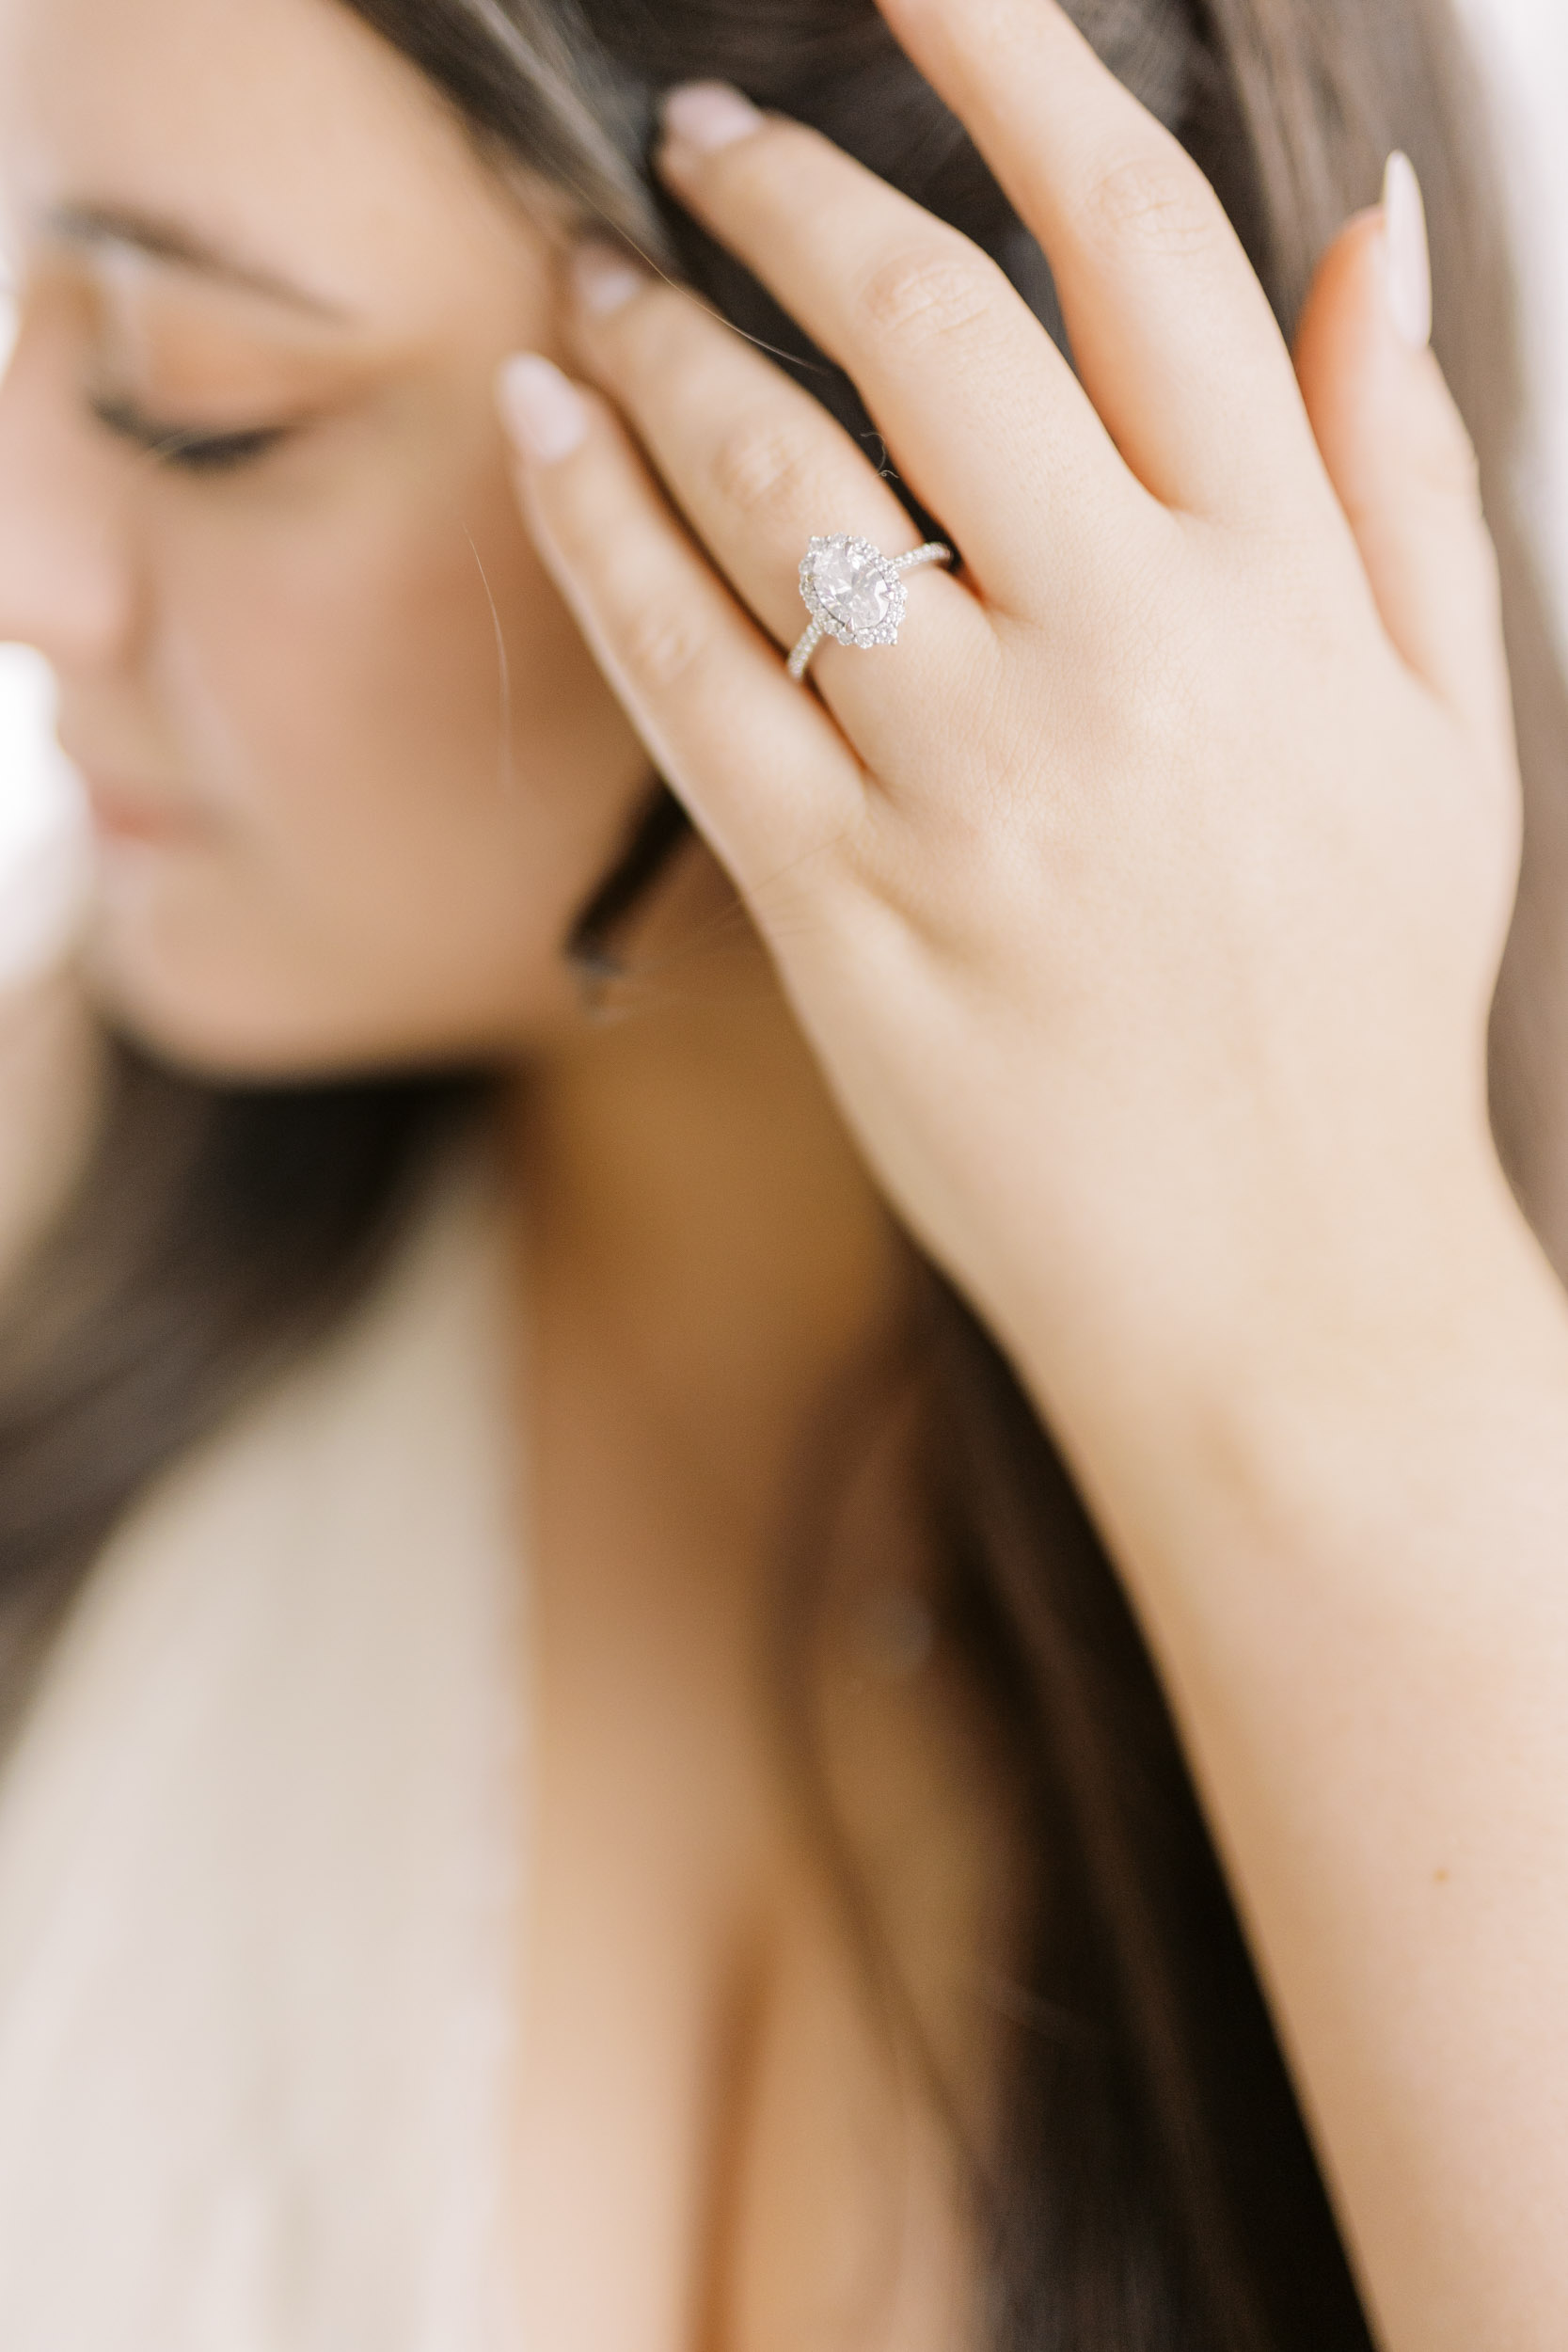 Bride with her engagement ring